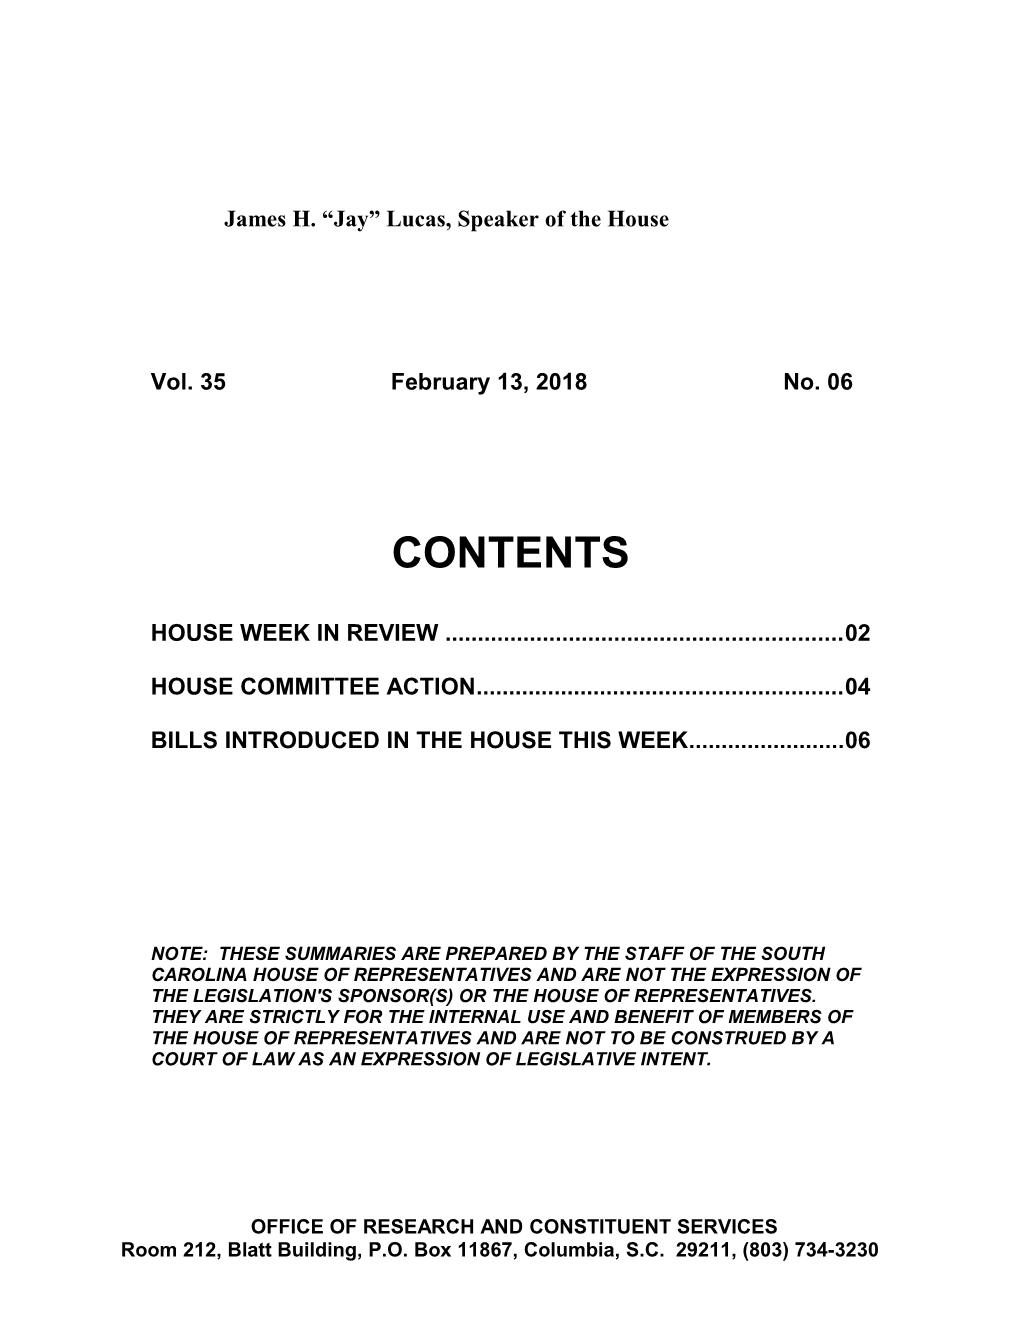 Bills Introduced in the House This Week 06